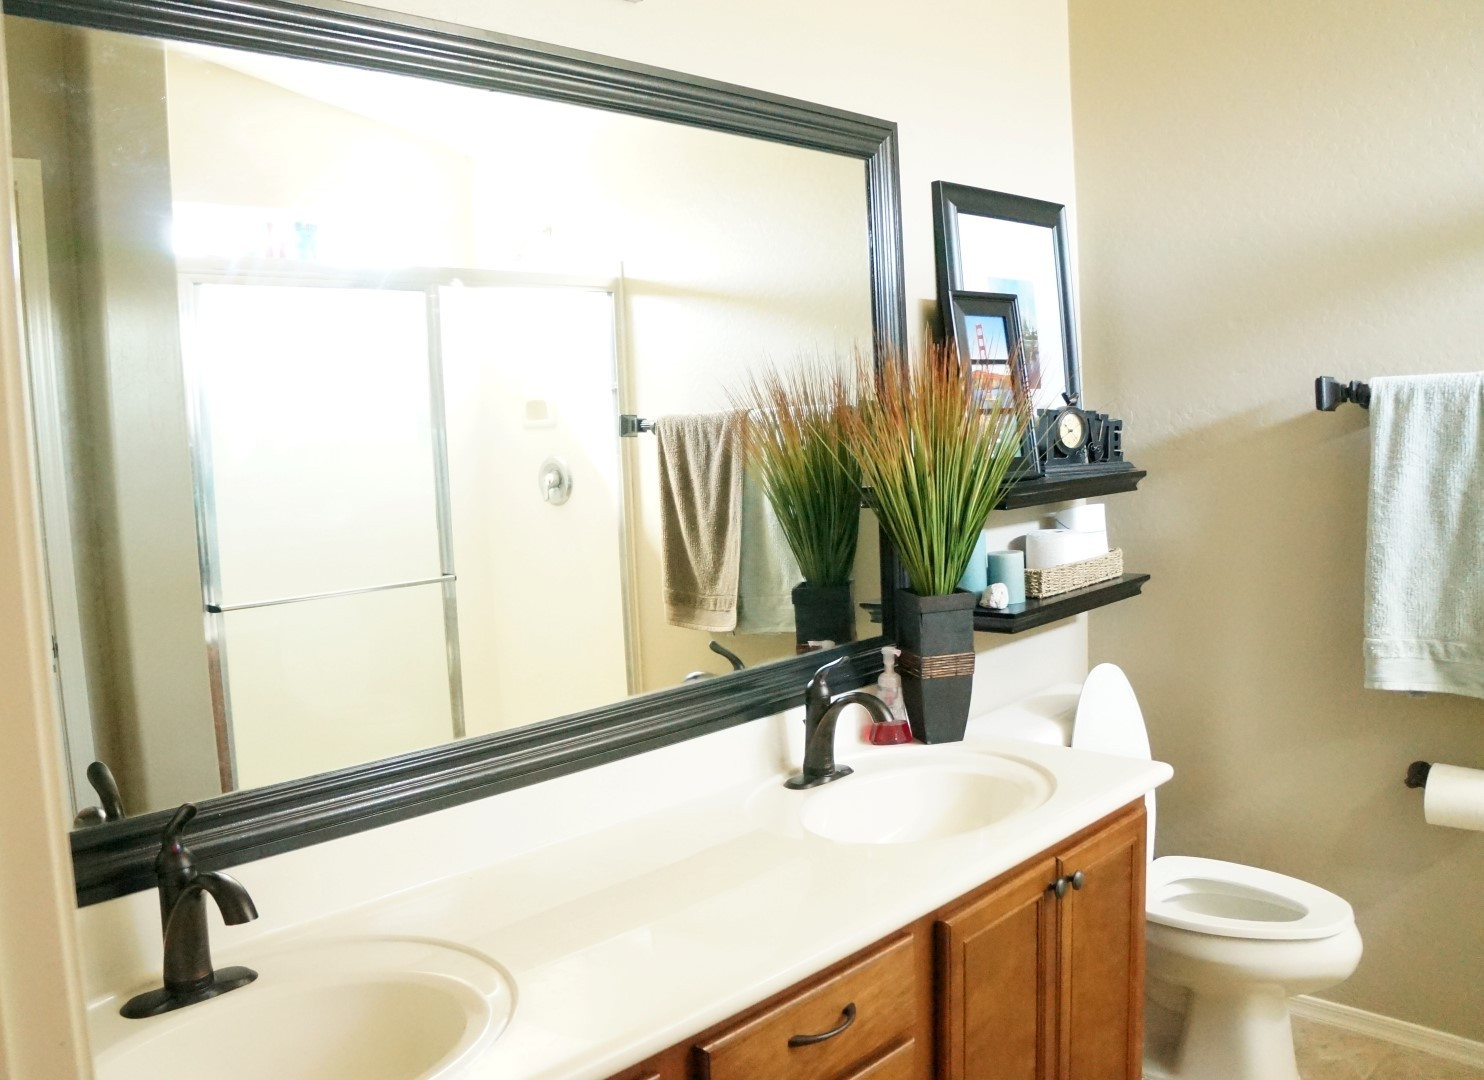 Frame A Bathroom Mirror
 How to Frame A Mirror The Builder s Installed A Mom s Take